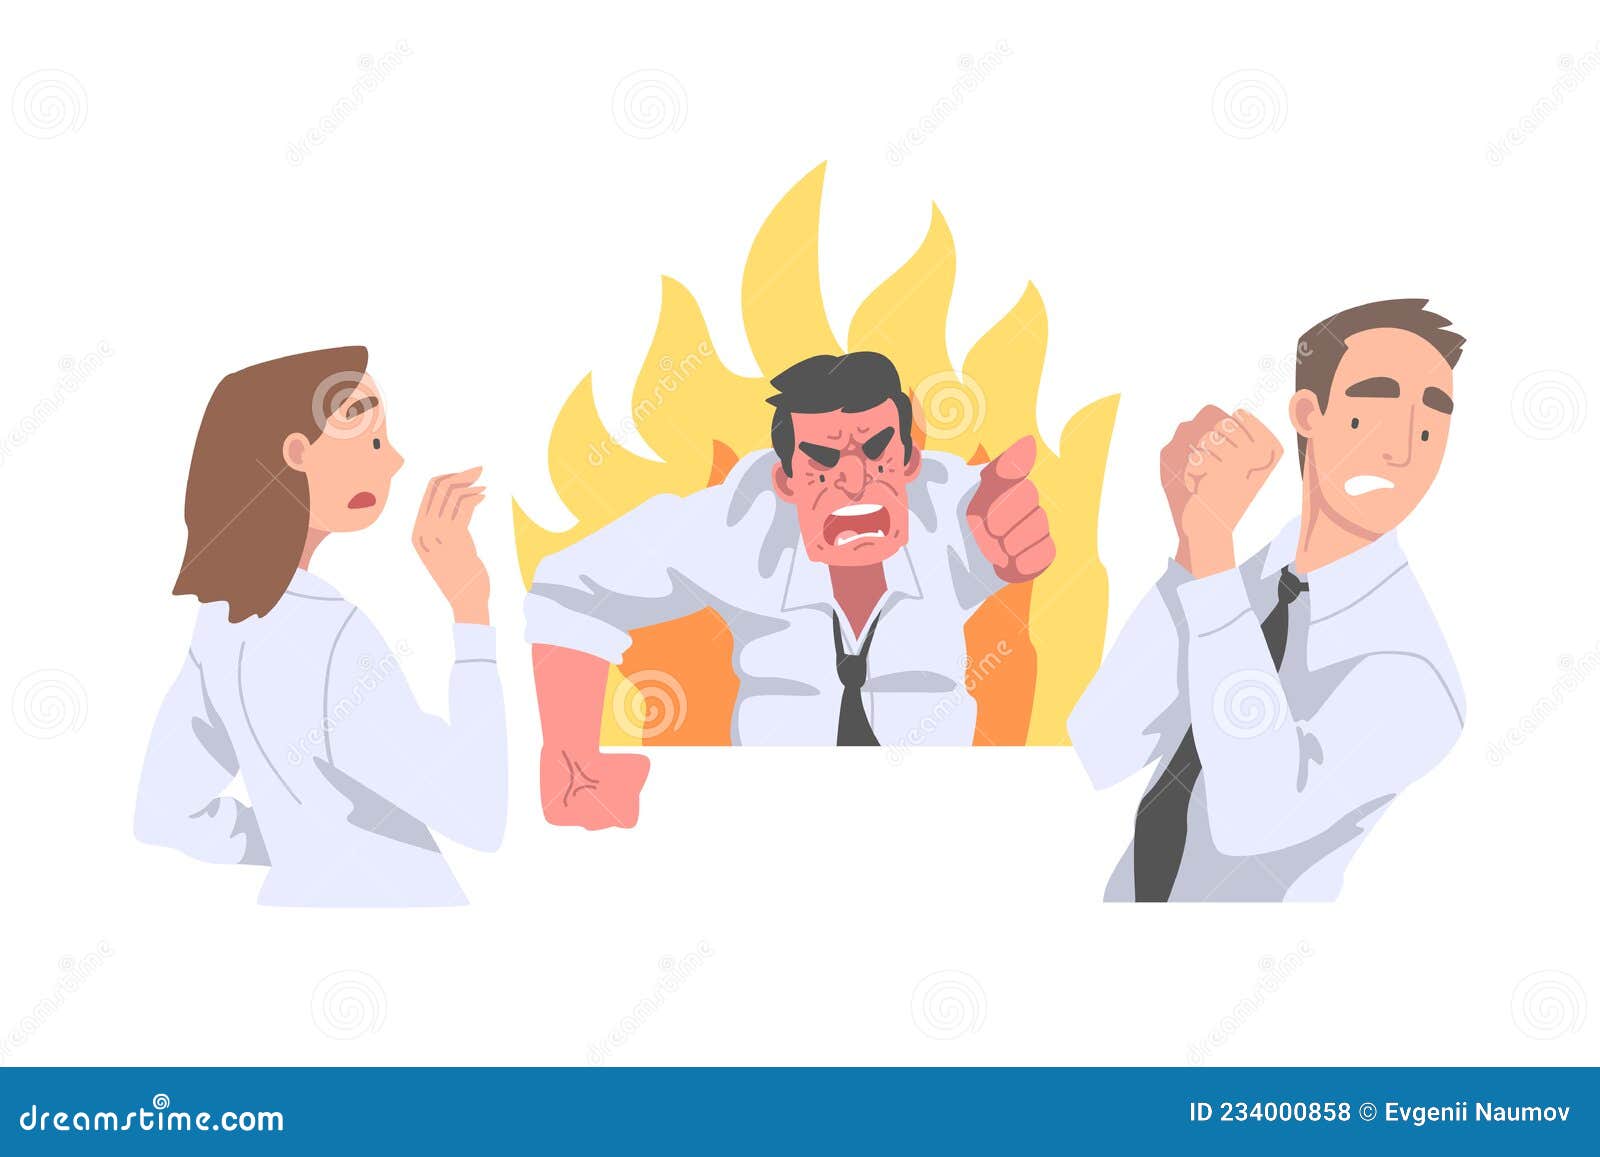 furious chief screaming and yelling in anger at scared employee  